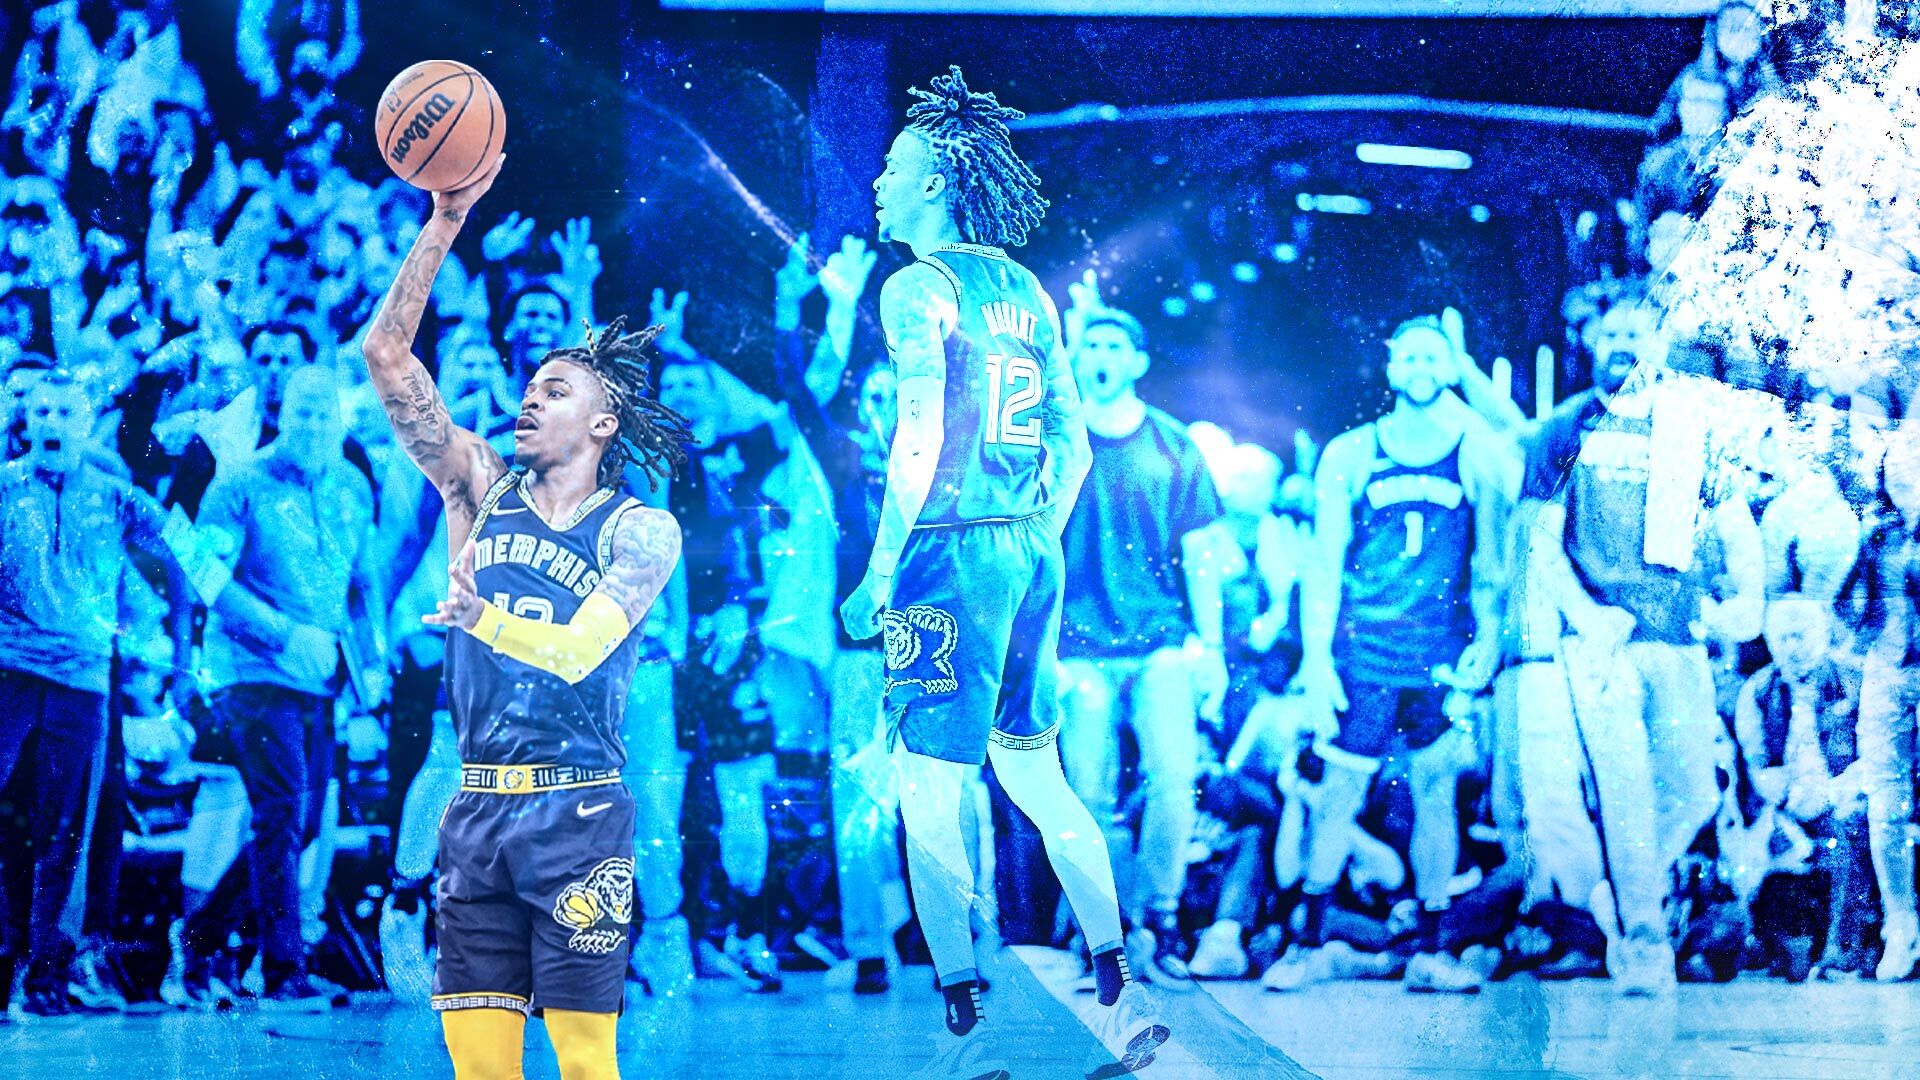 Ja Morant's highlight dunk: Where does it rank all time?